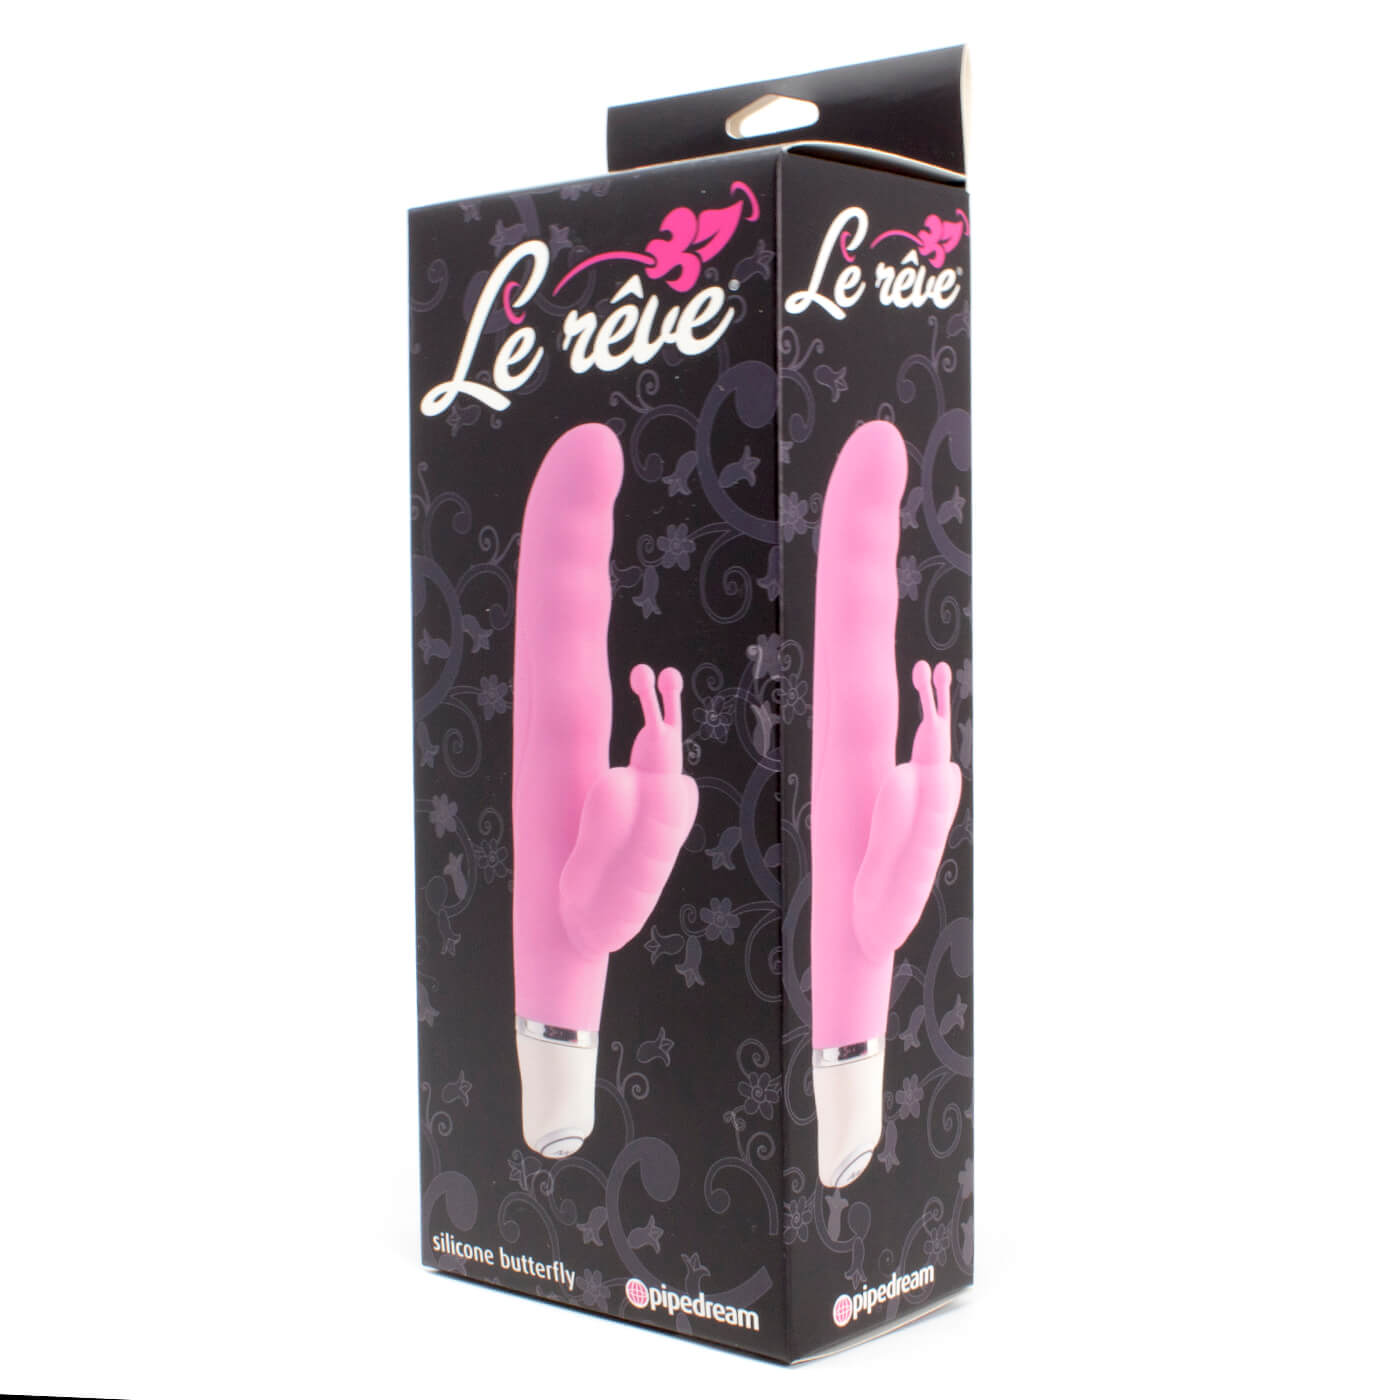 Le Reve Silicone Waterproof Butterfly Vibrator